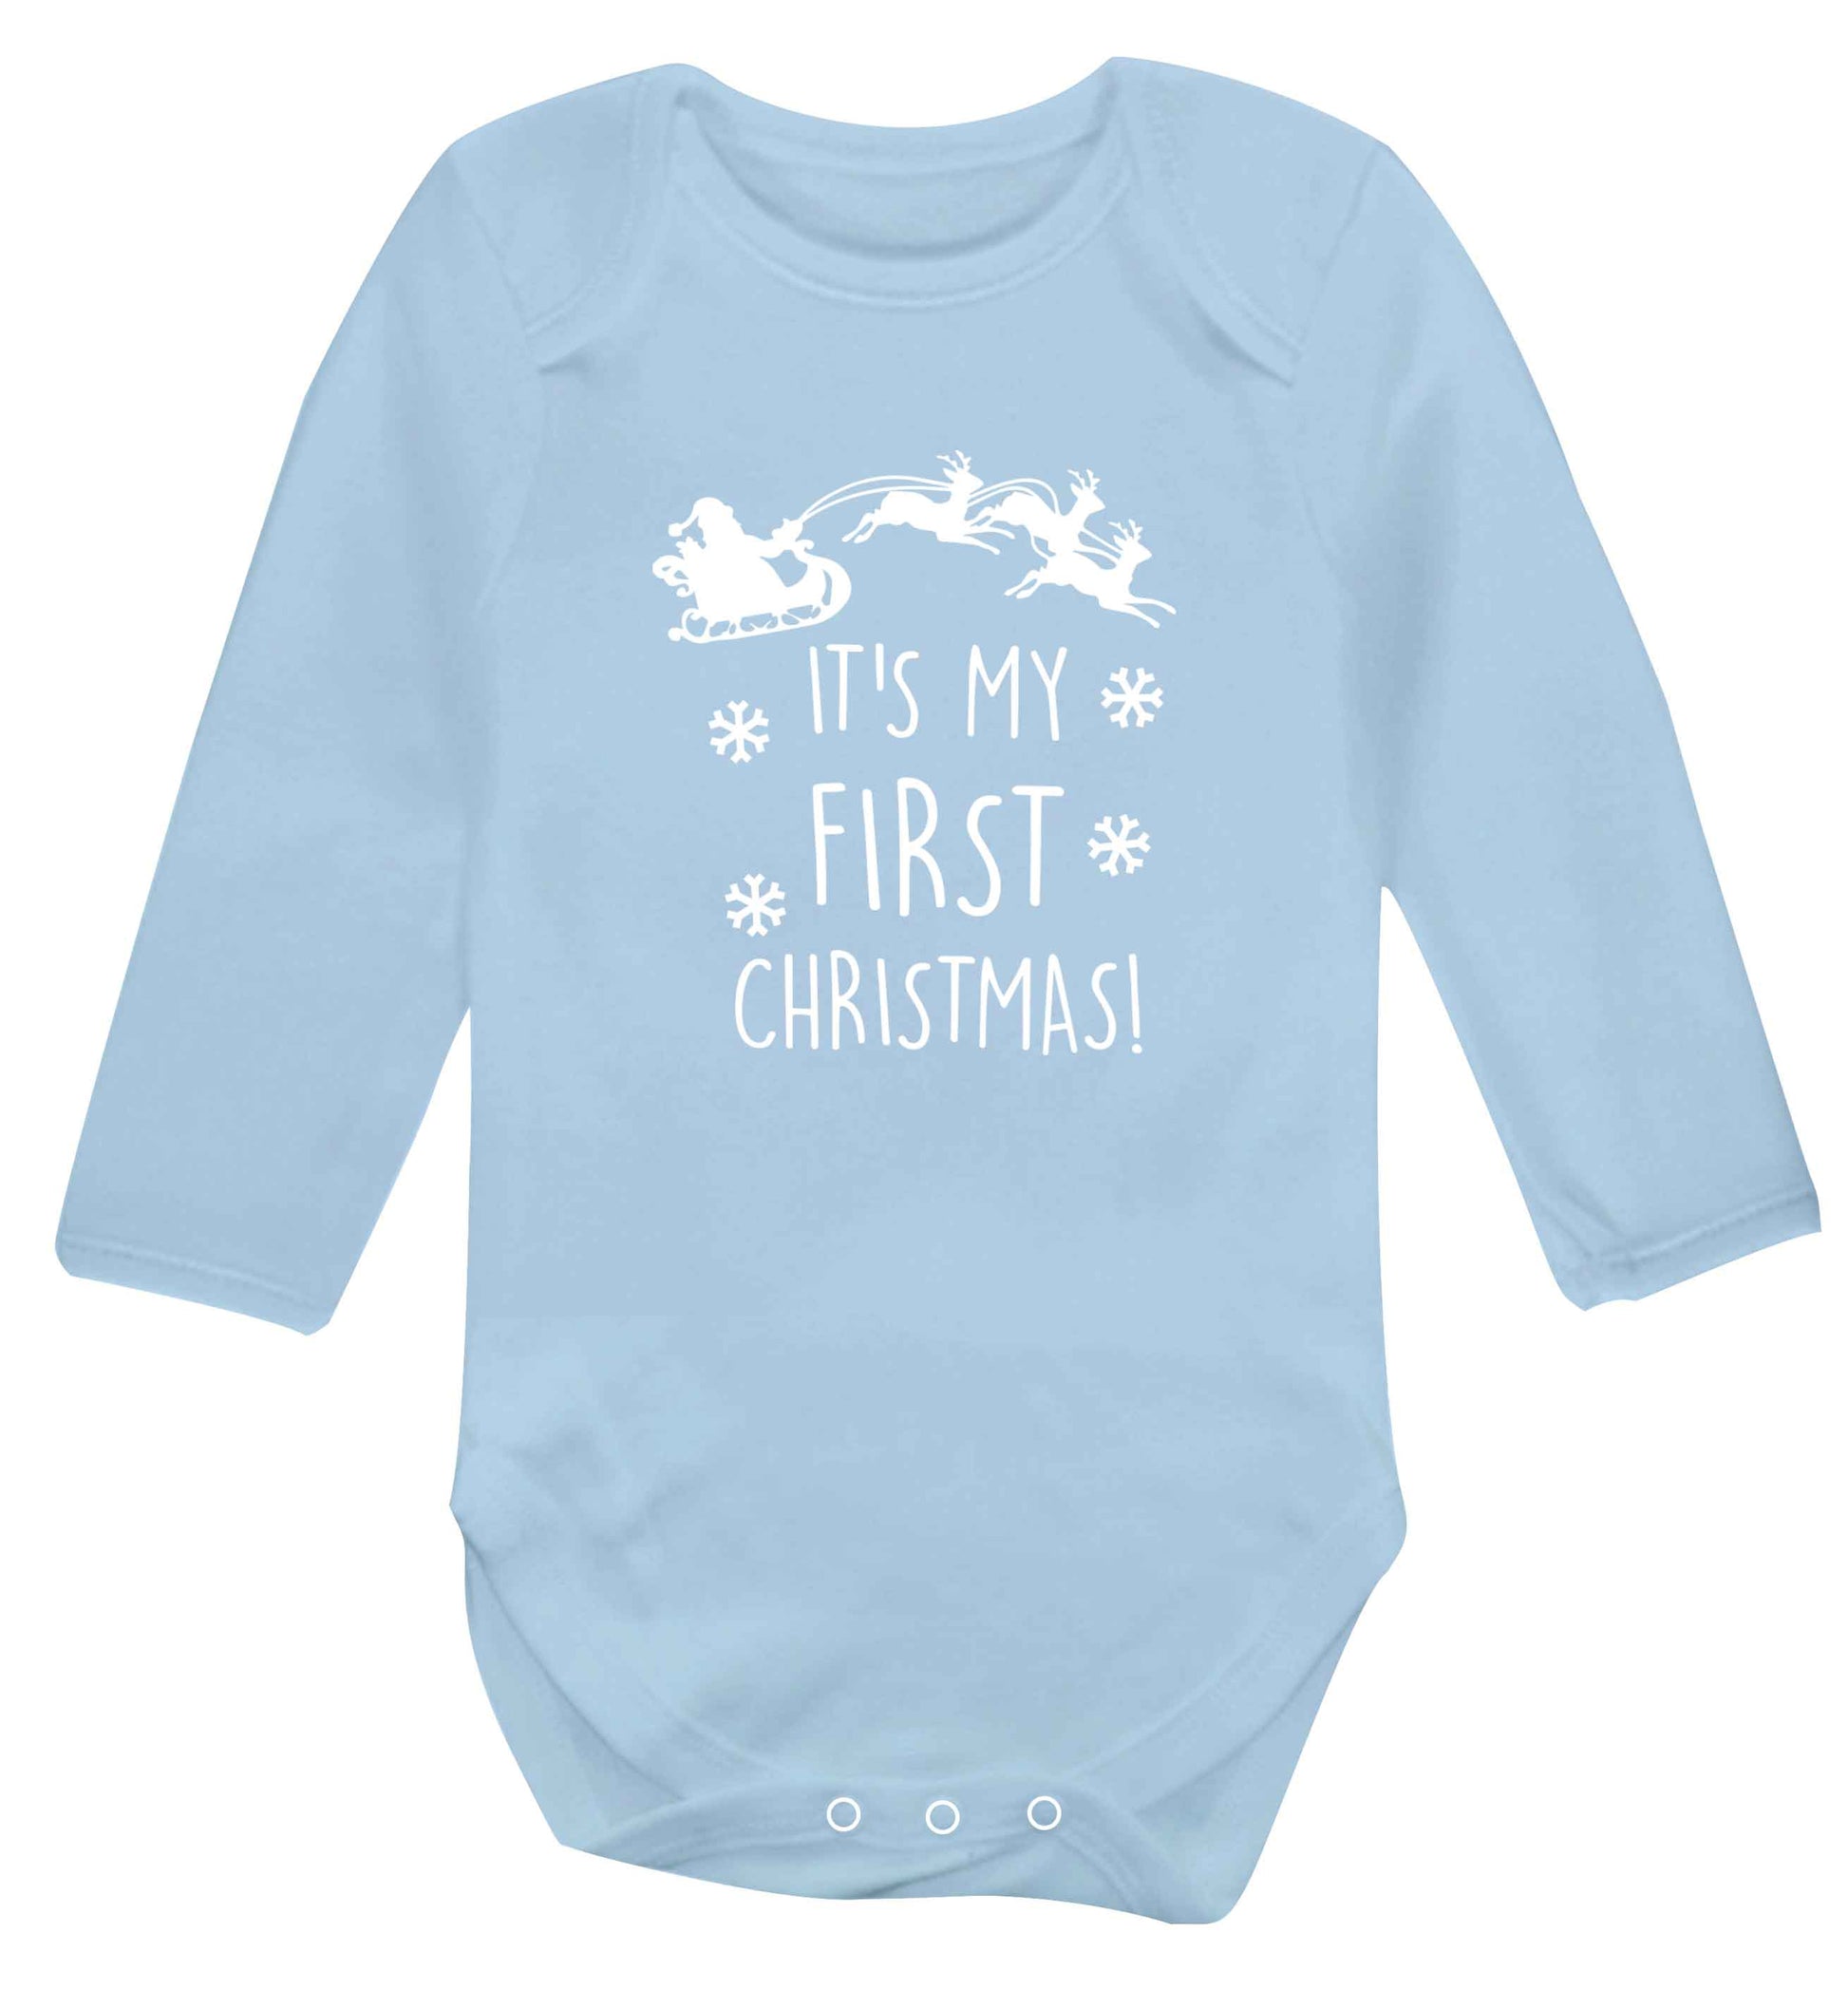 It's my first Christmas - Santa sleigh text baby vest long sleeved pale blue 6-12 months